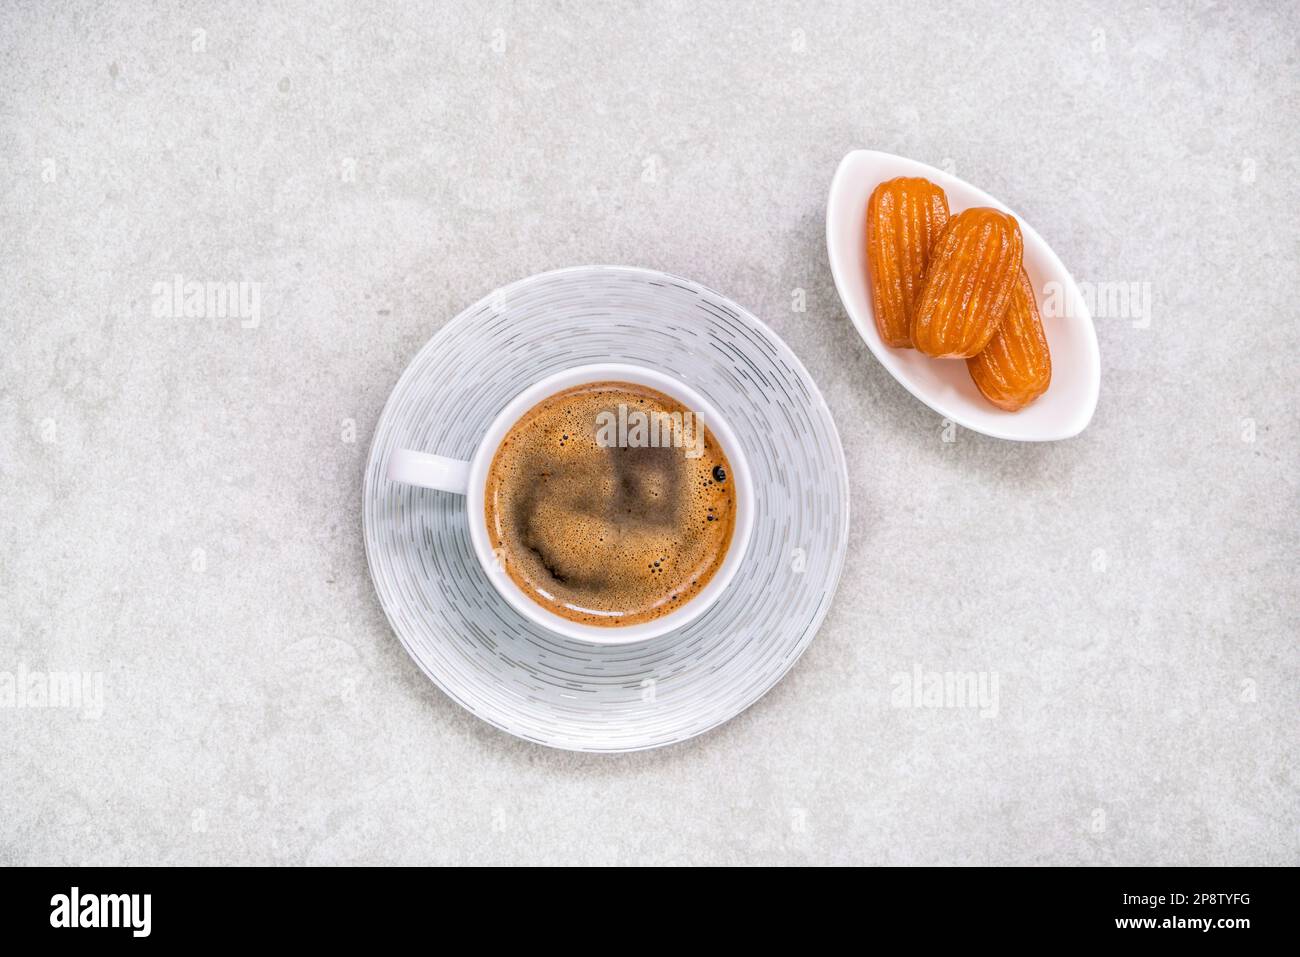 Coffee, Turkish Coffee with traditional dessert with syrup sherbet, one of the traditional dessert known as 'tulumba' in Turkish, Republic of Turkey. Stock Photo